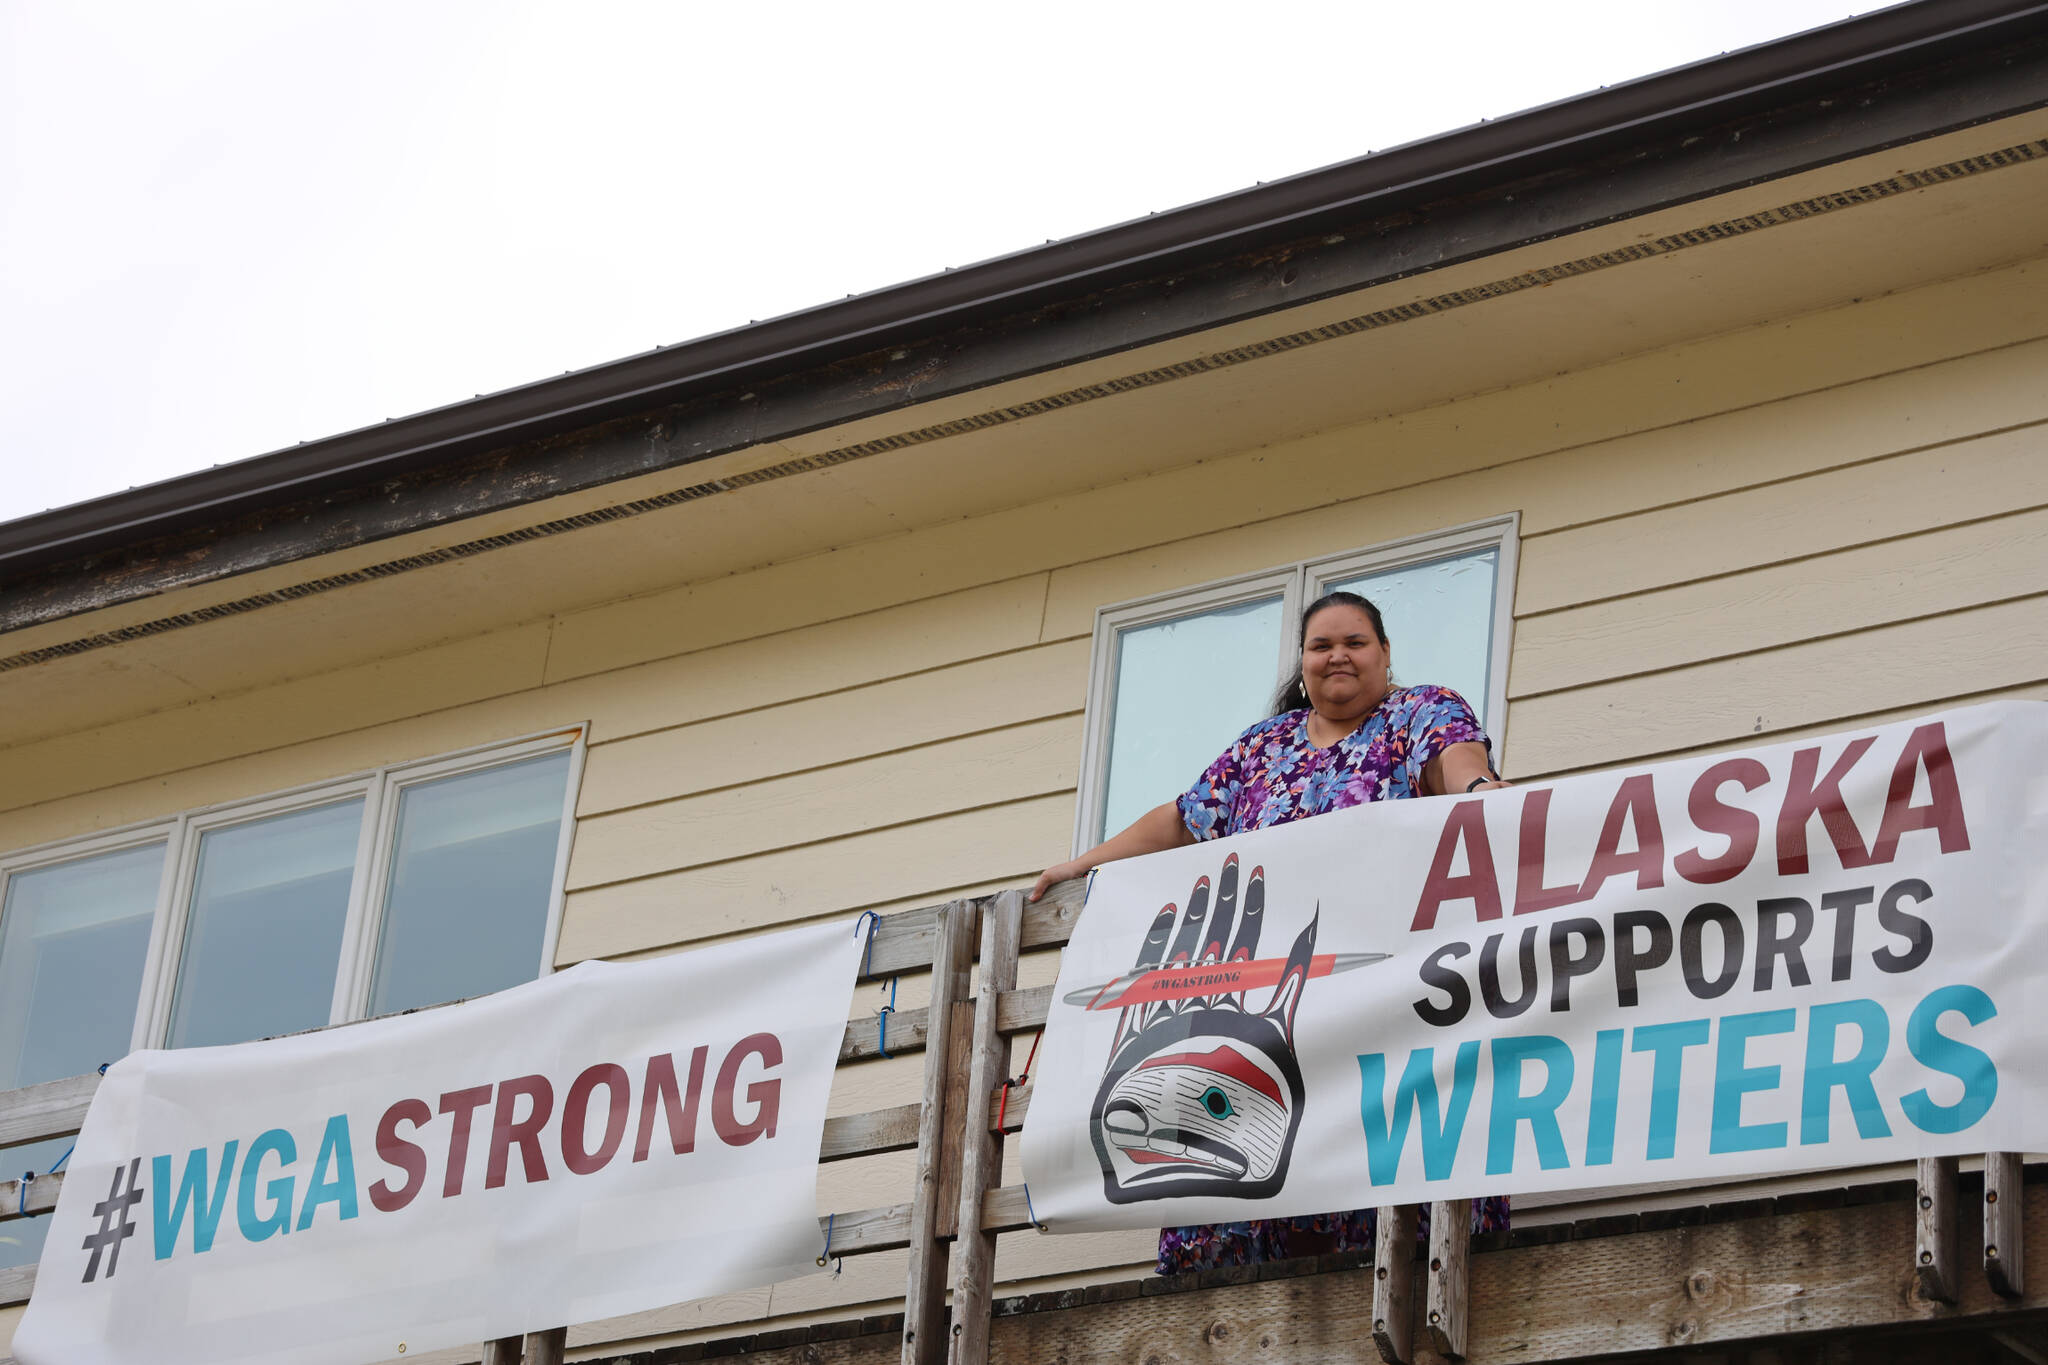 Award-winning Juneau author Vera Starbard stands on her balcony on Douglas Island and displays banners across the Gastineau Channel in support of the Writer's Guild of America union strike currently taking place across Hollywood and across the country.  (Clarise Larson / Juneau Empire)